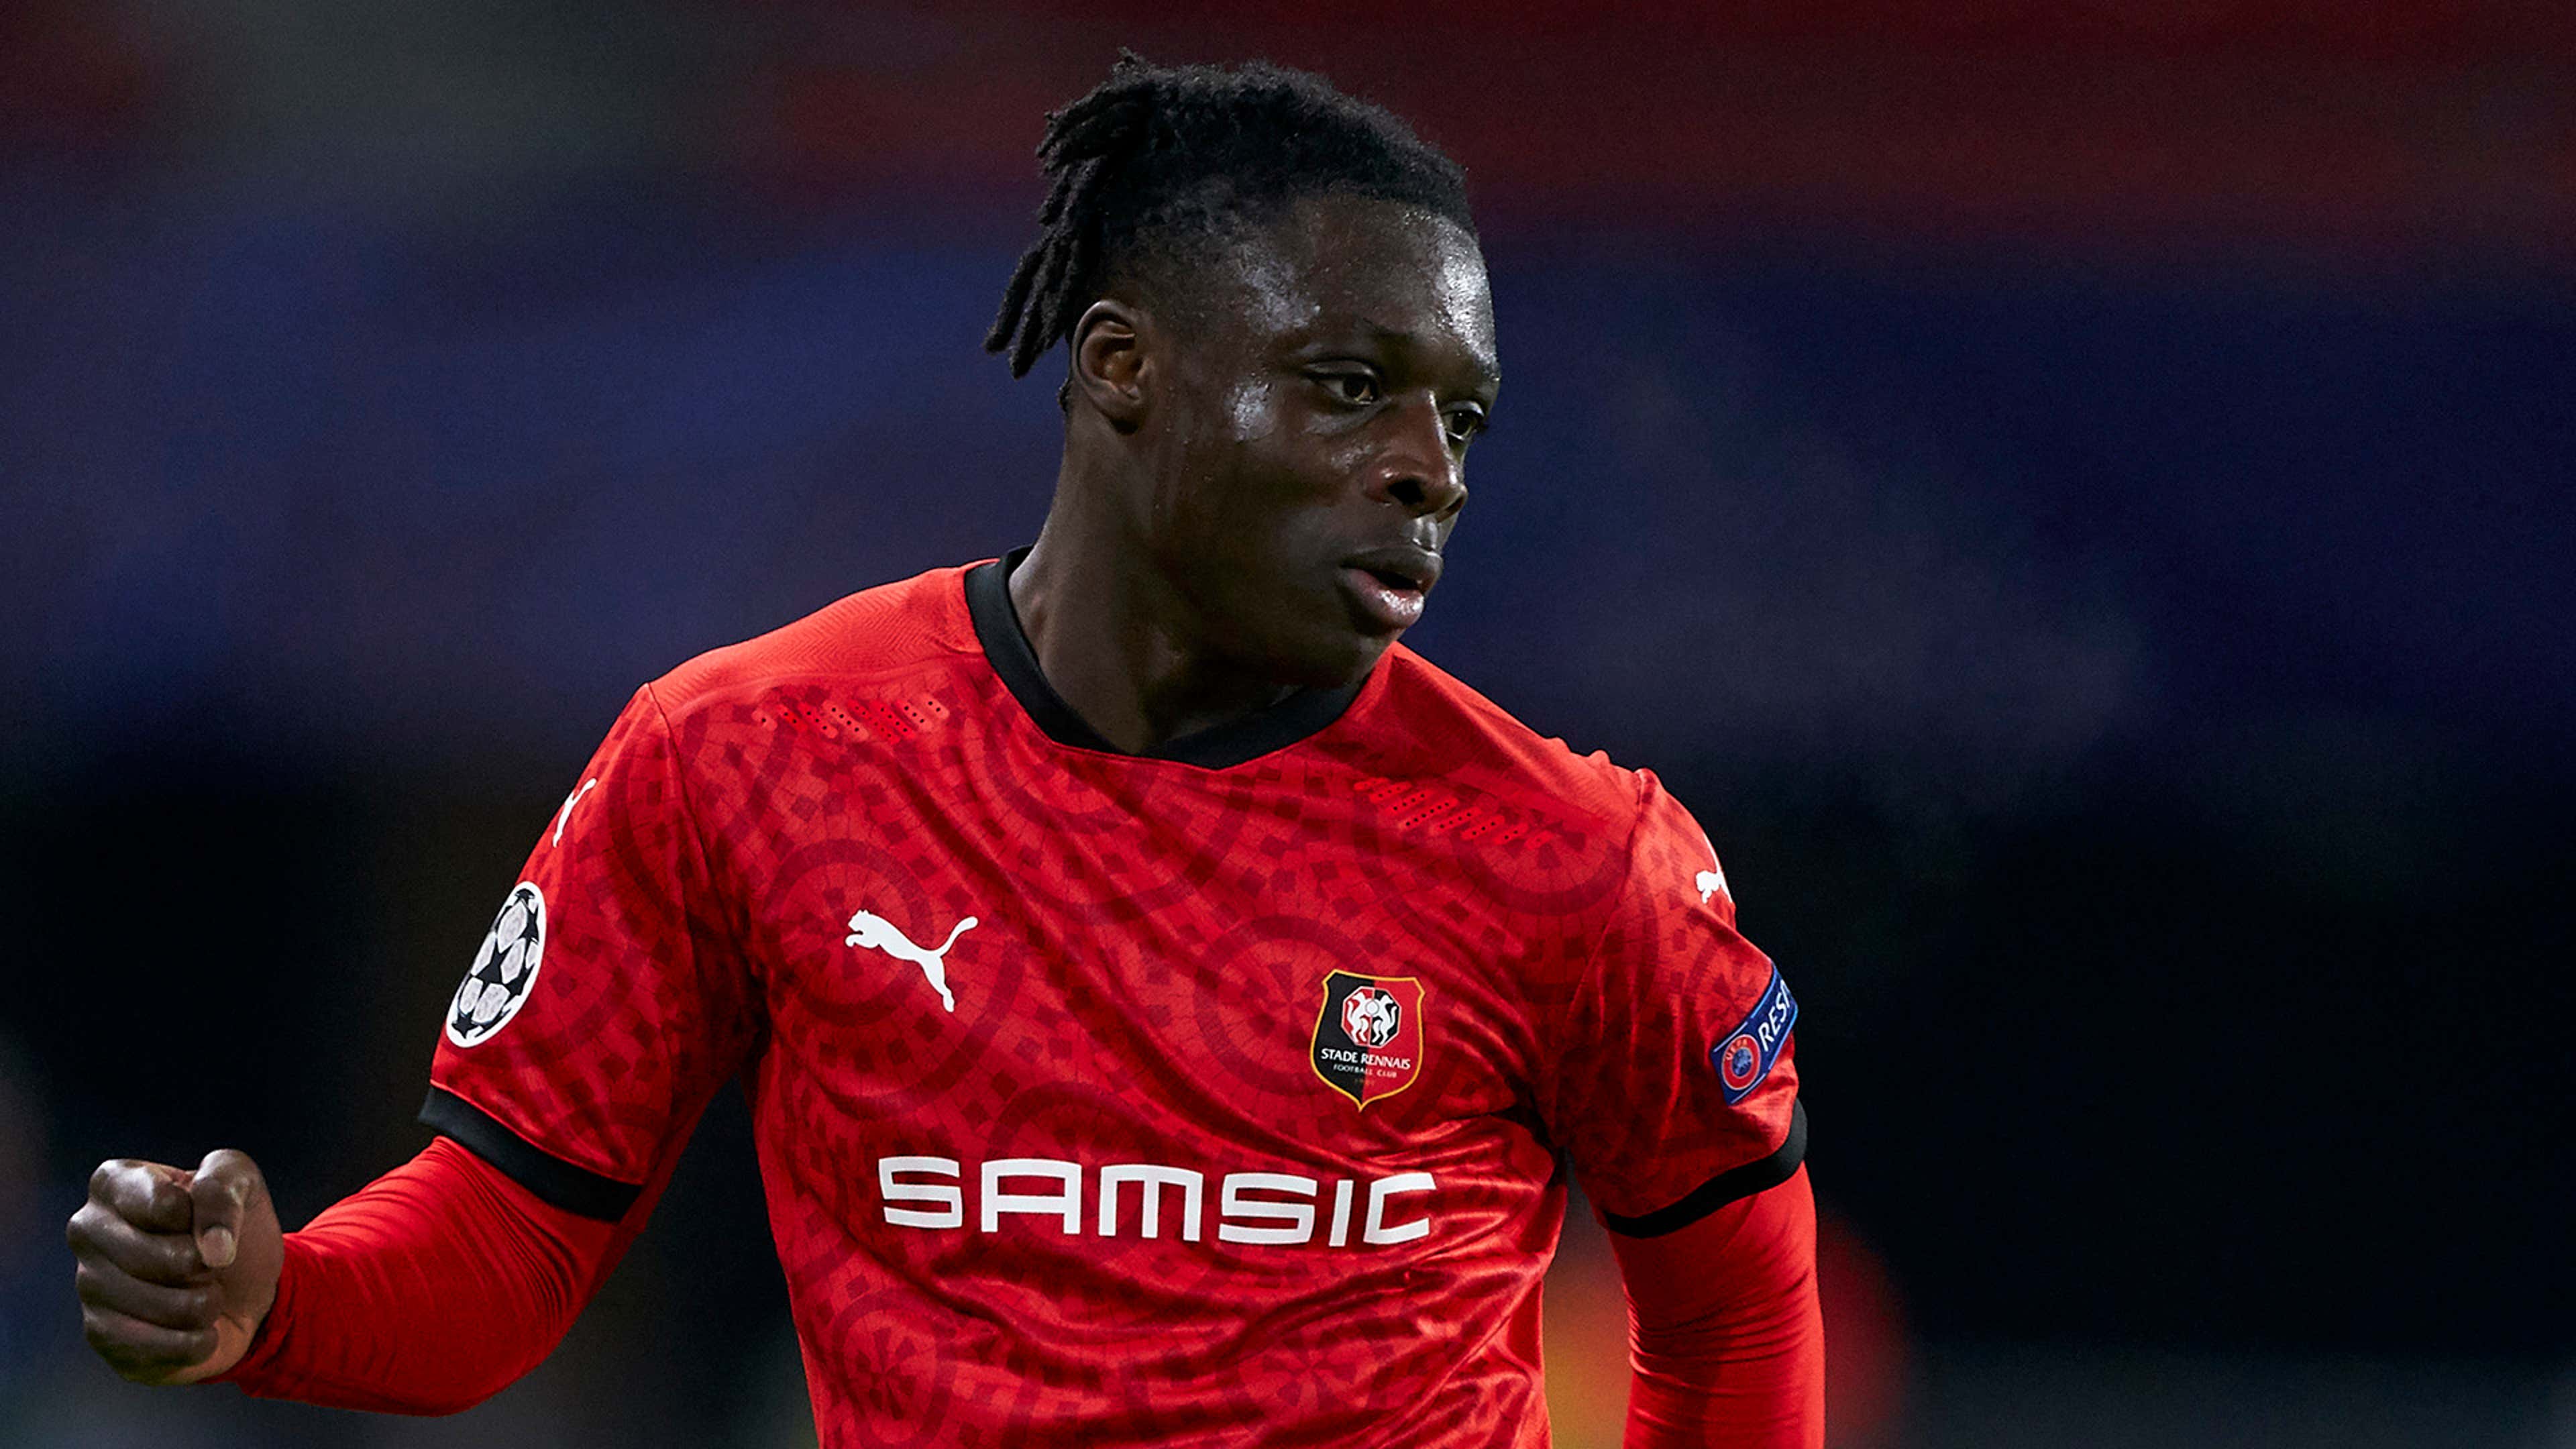 Rennes wonderkid Doku explains why he turned down Liverpool after chat with Mane | Goal.com